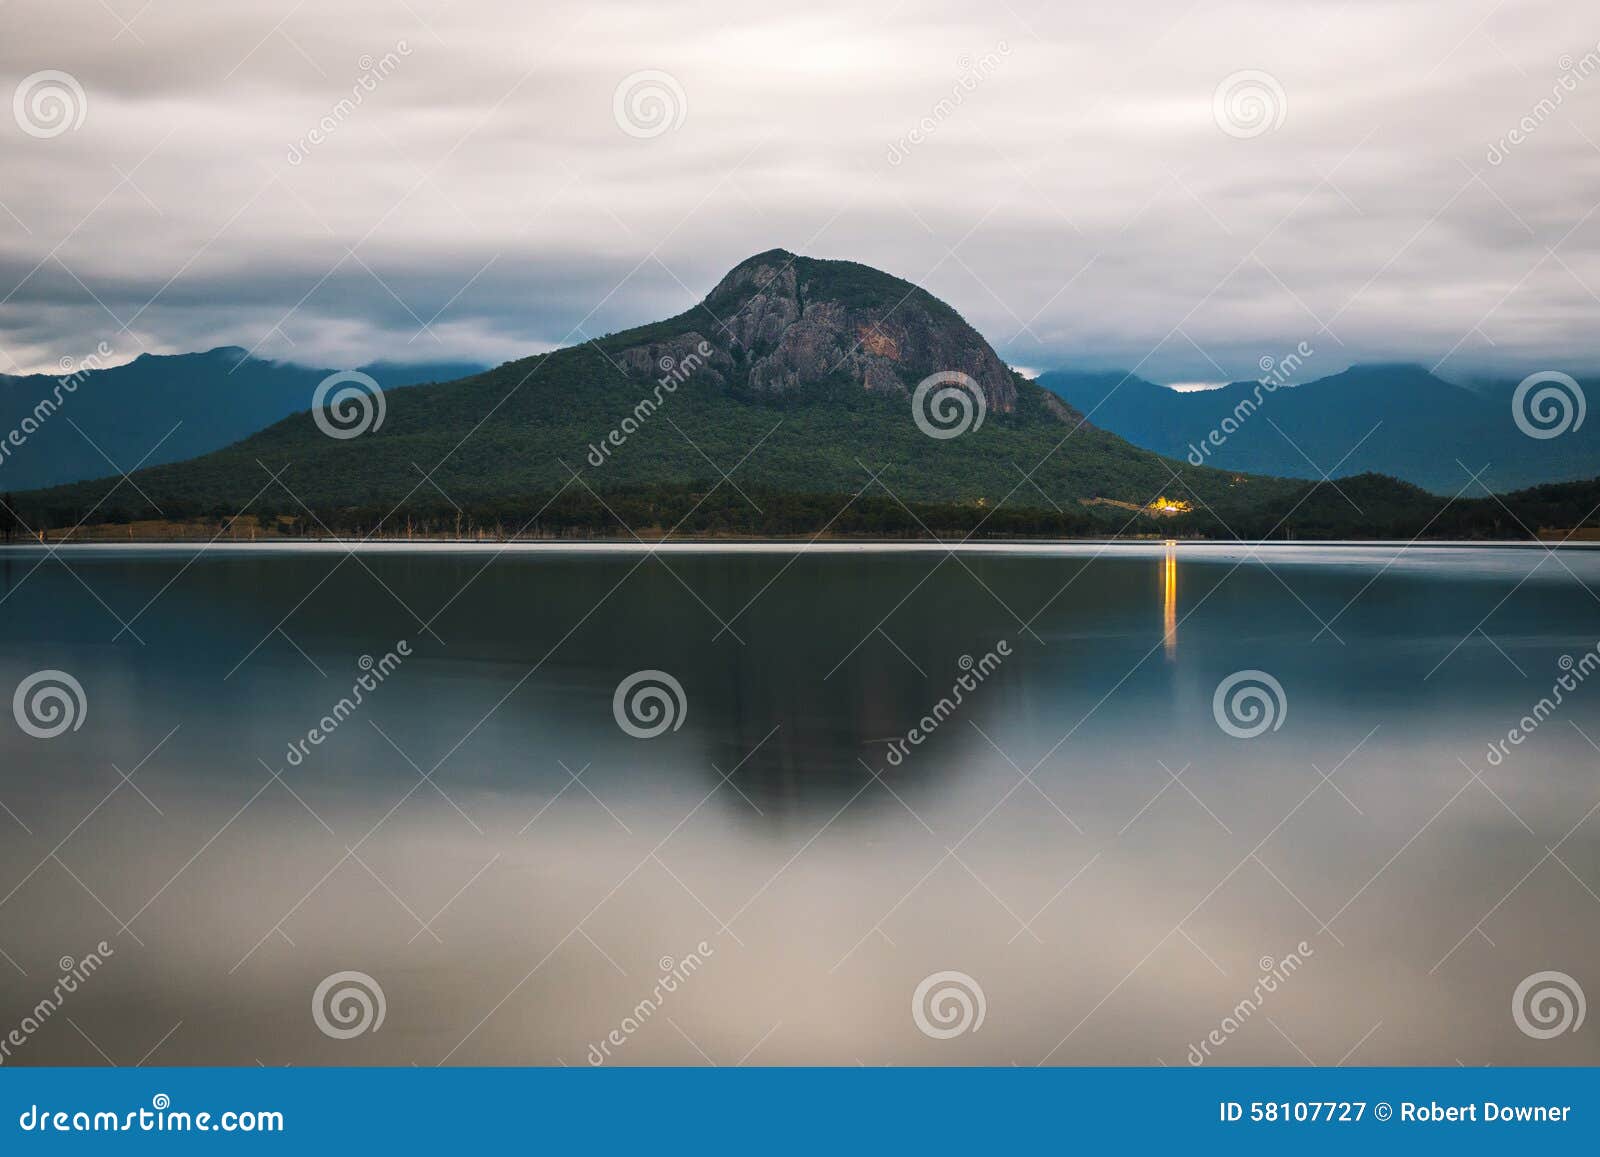 lake moogerah in queensland during the day